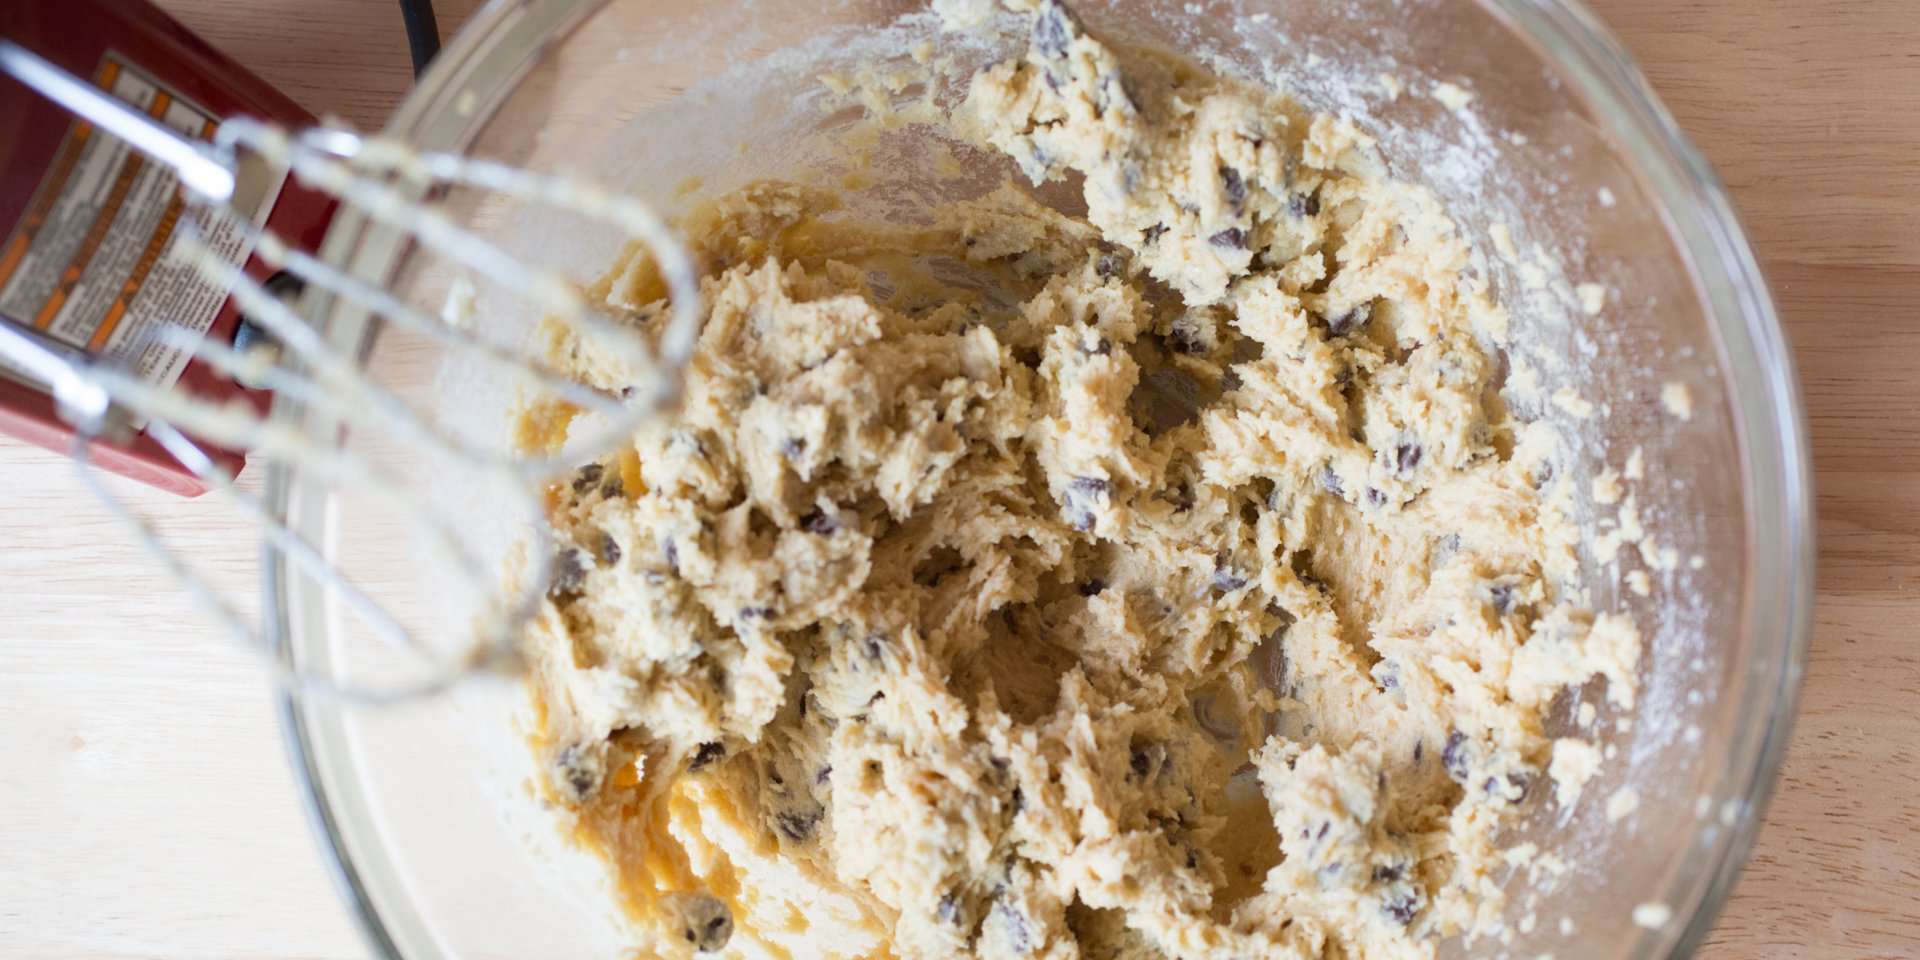 Taboola Ad Example 62484 - The Reason You Should Never Eat Raw Cookie Dough Goes Beyond The Eggs